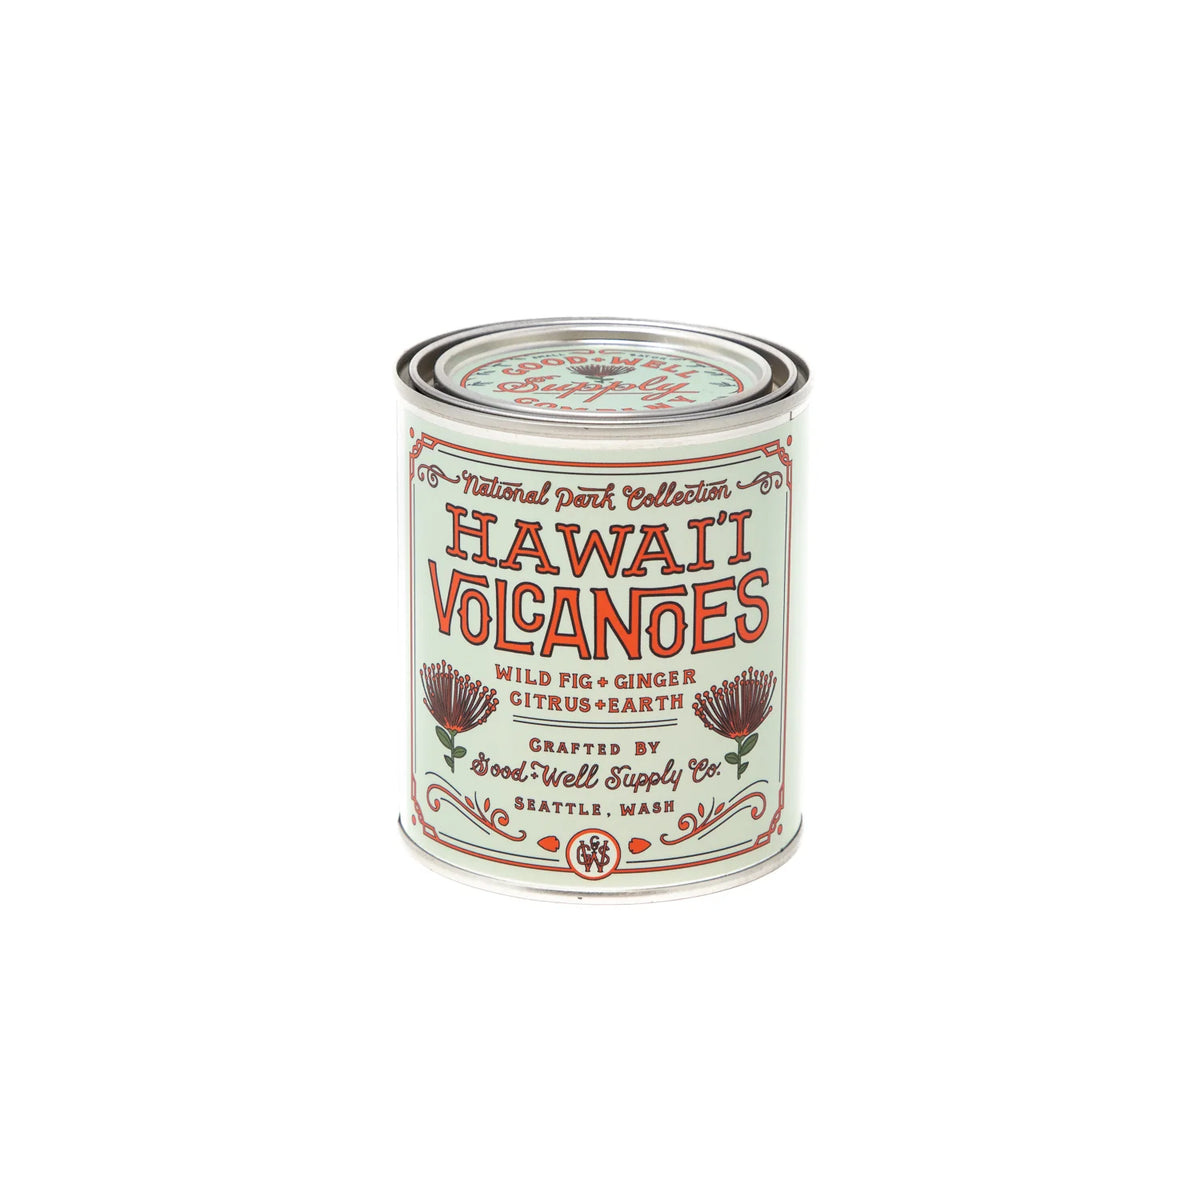 Good & Well Supply Co Hawai'i Volcanoes National Park Candle 8oz